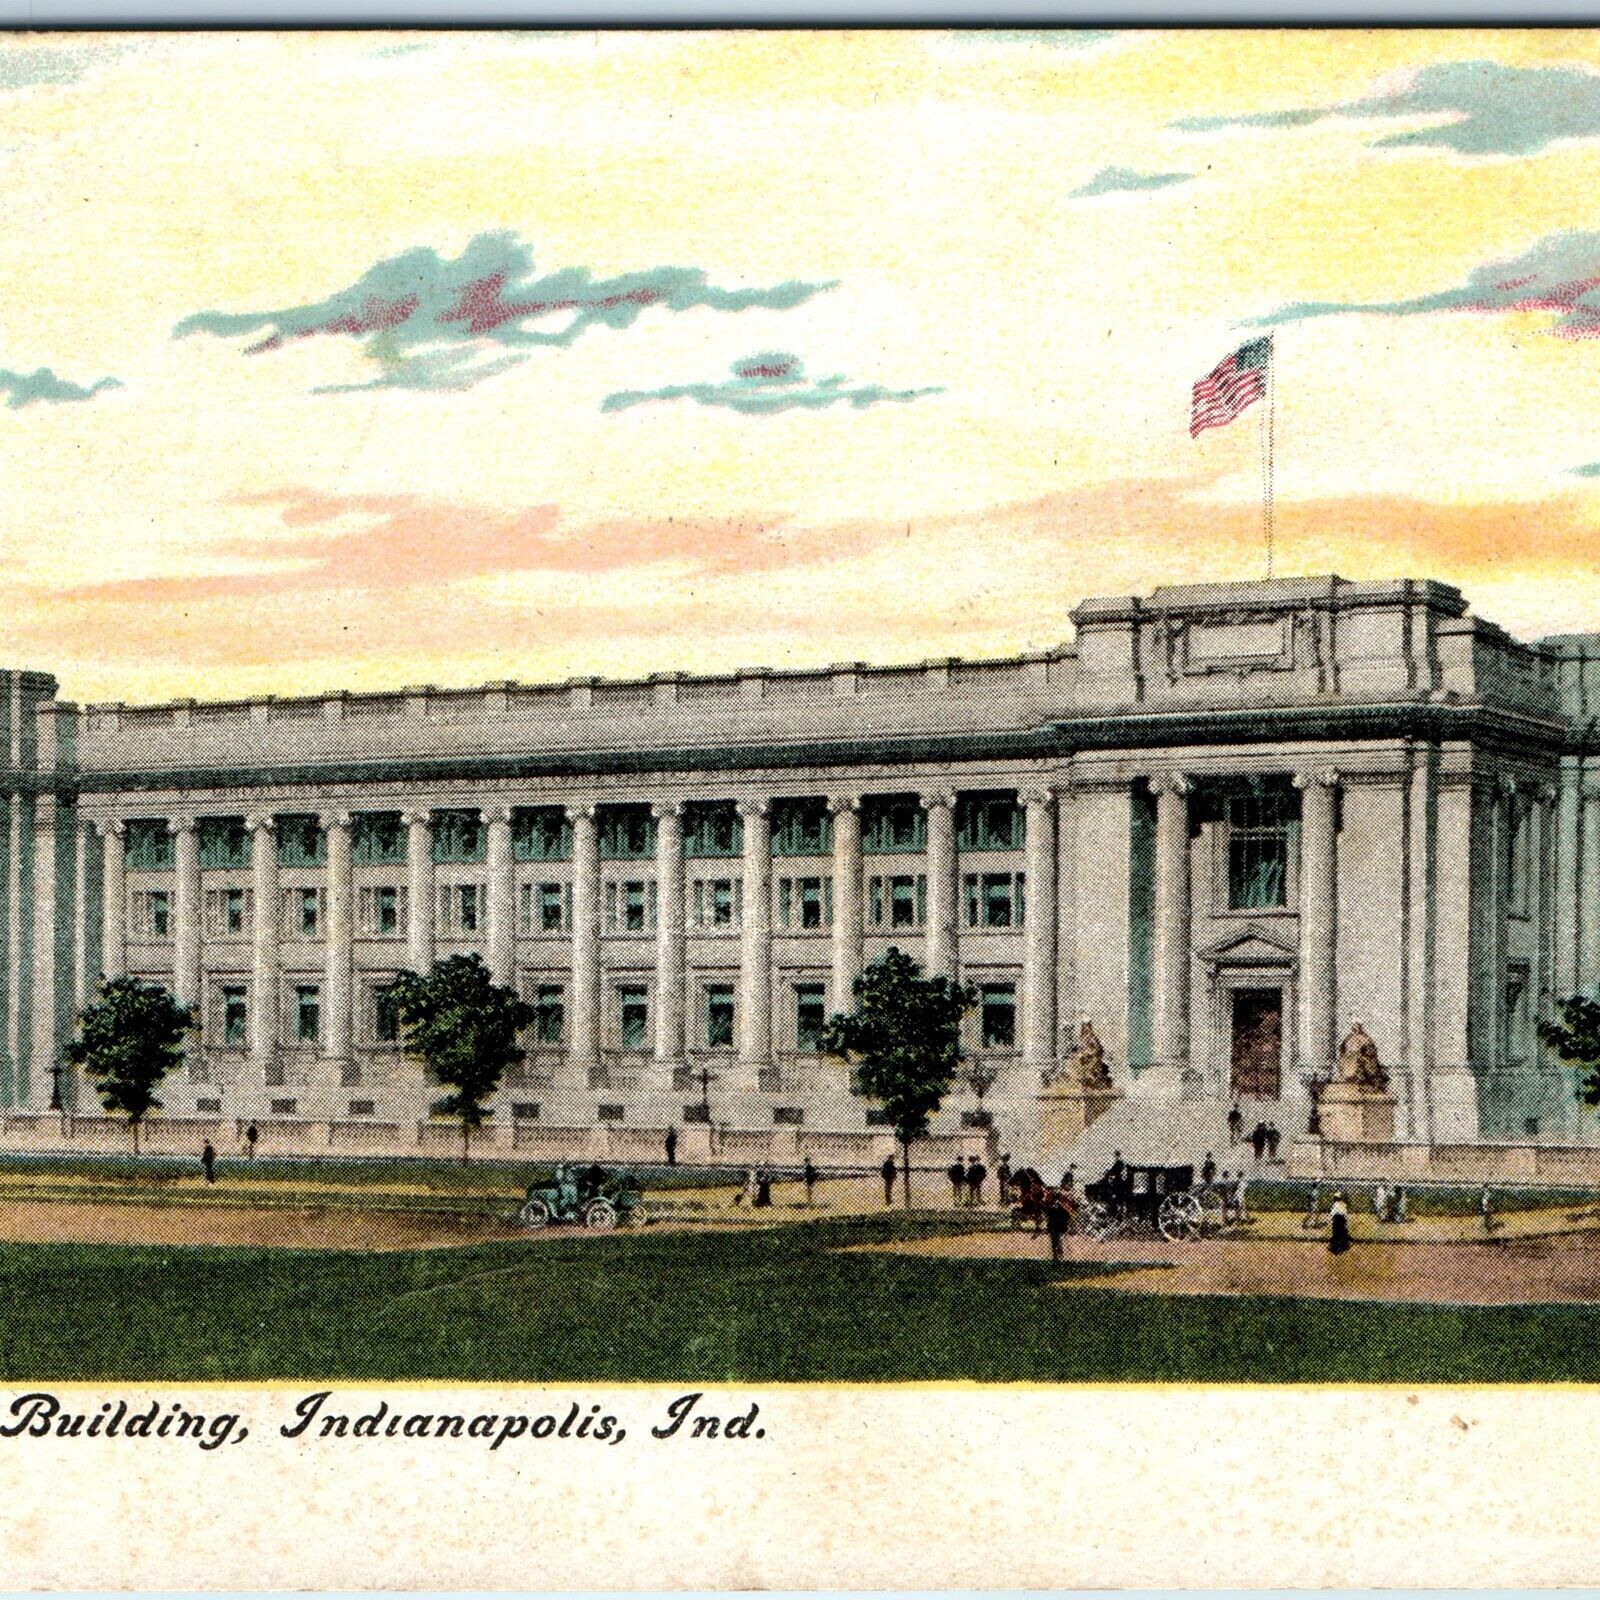 c1910s Indianapolis, Ind Courthouse Government Building Litho Photo Postcard A72